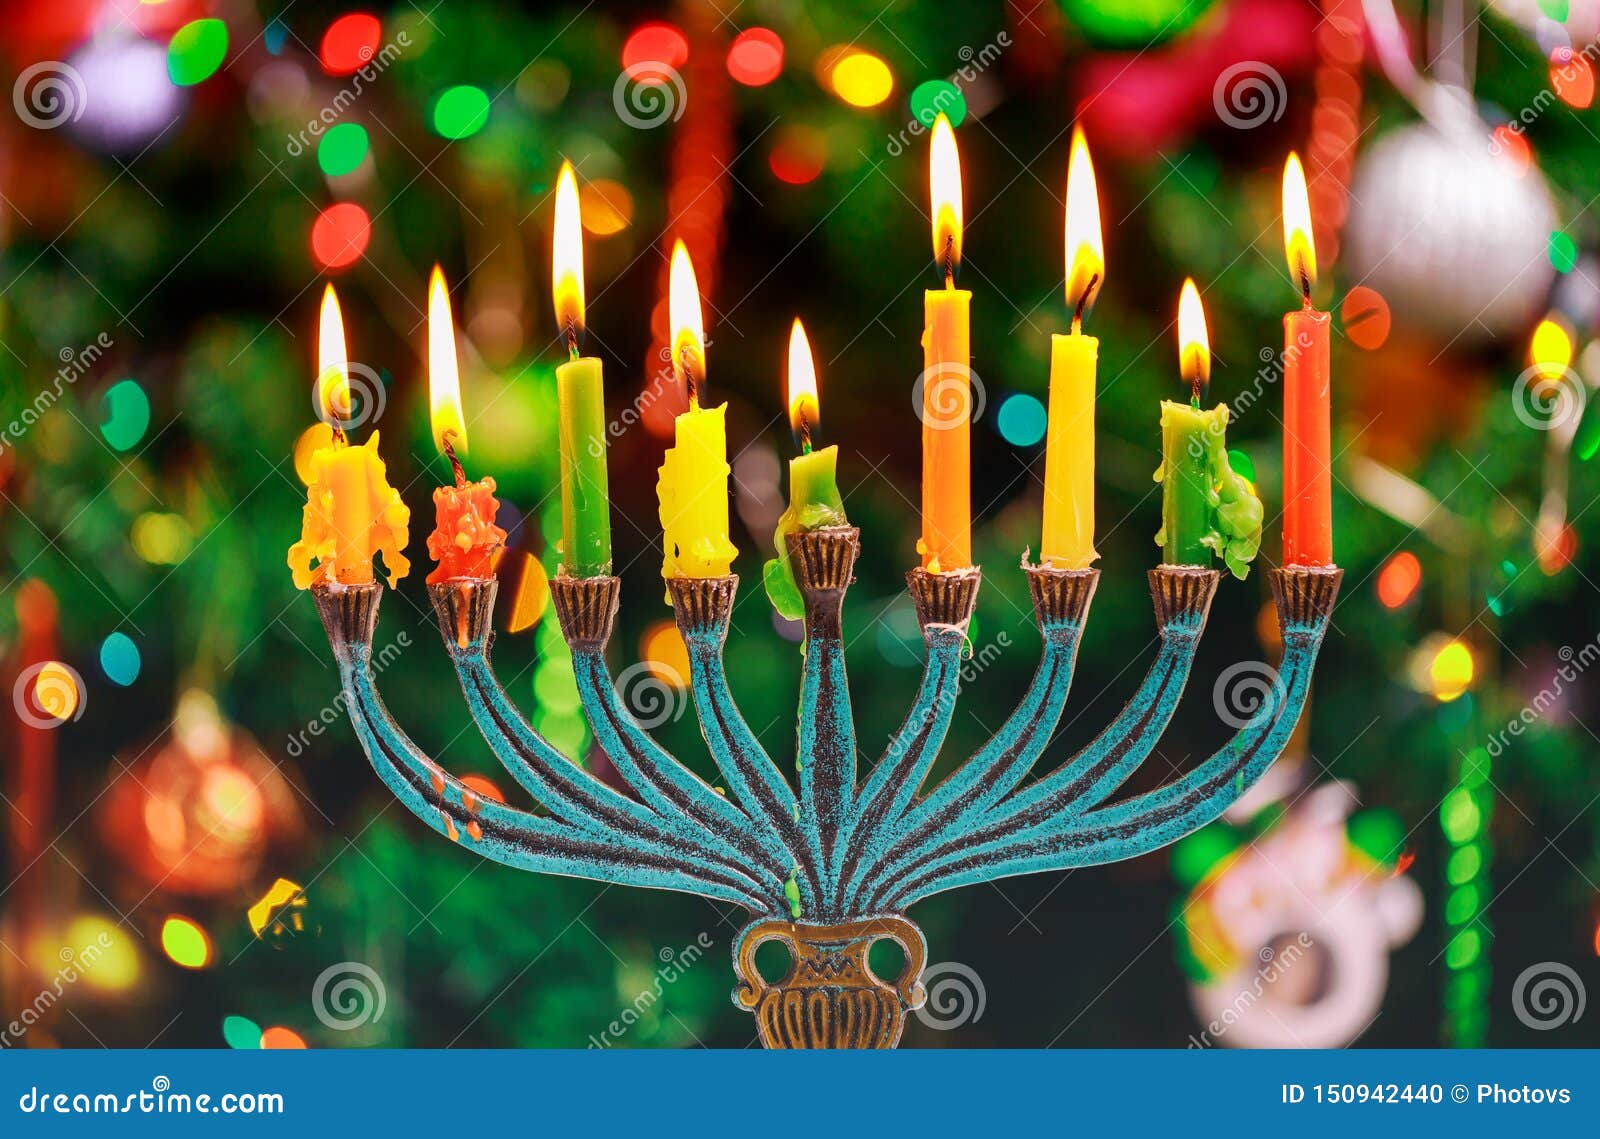 chanukah candles all in a  jewish holiday